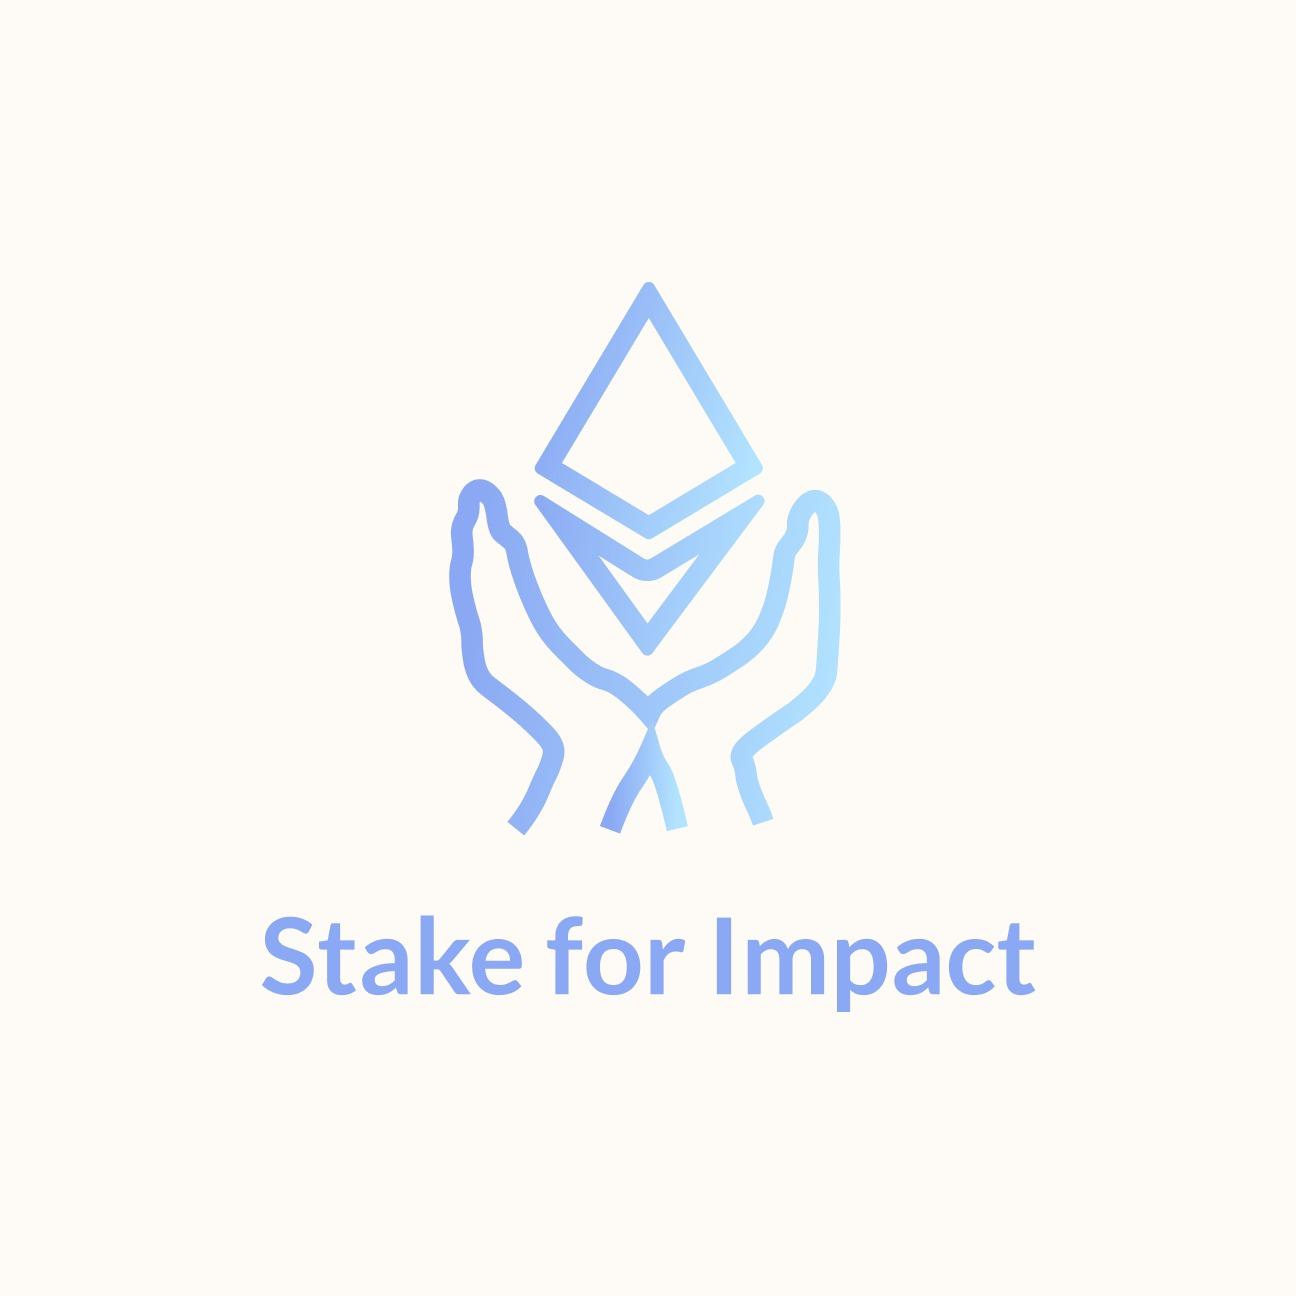 Stake for Impact